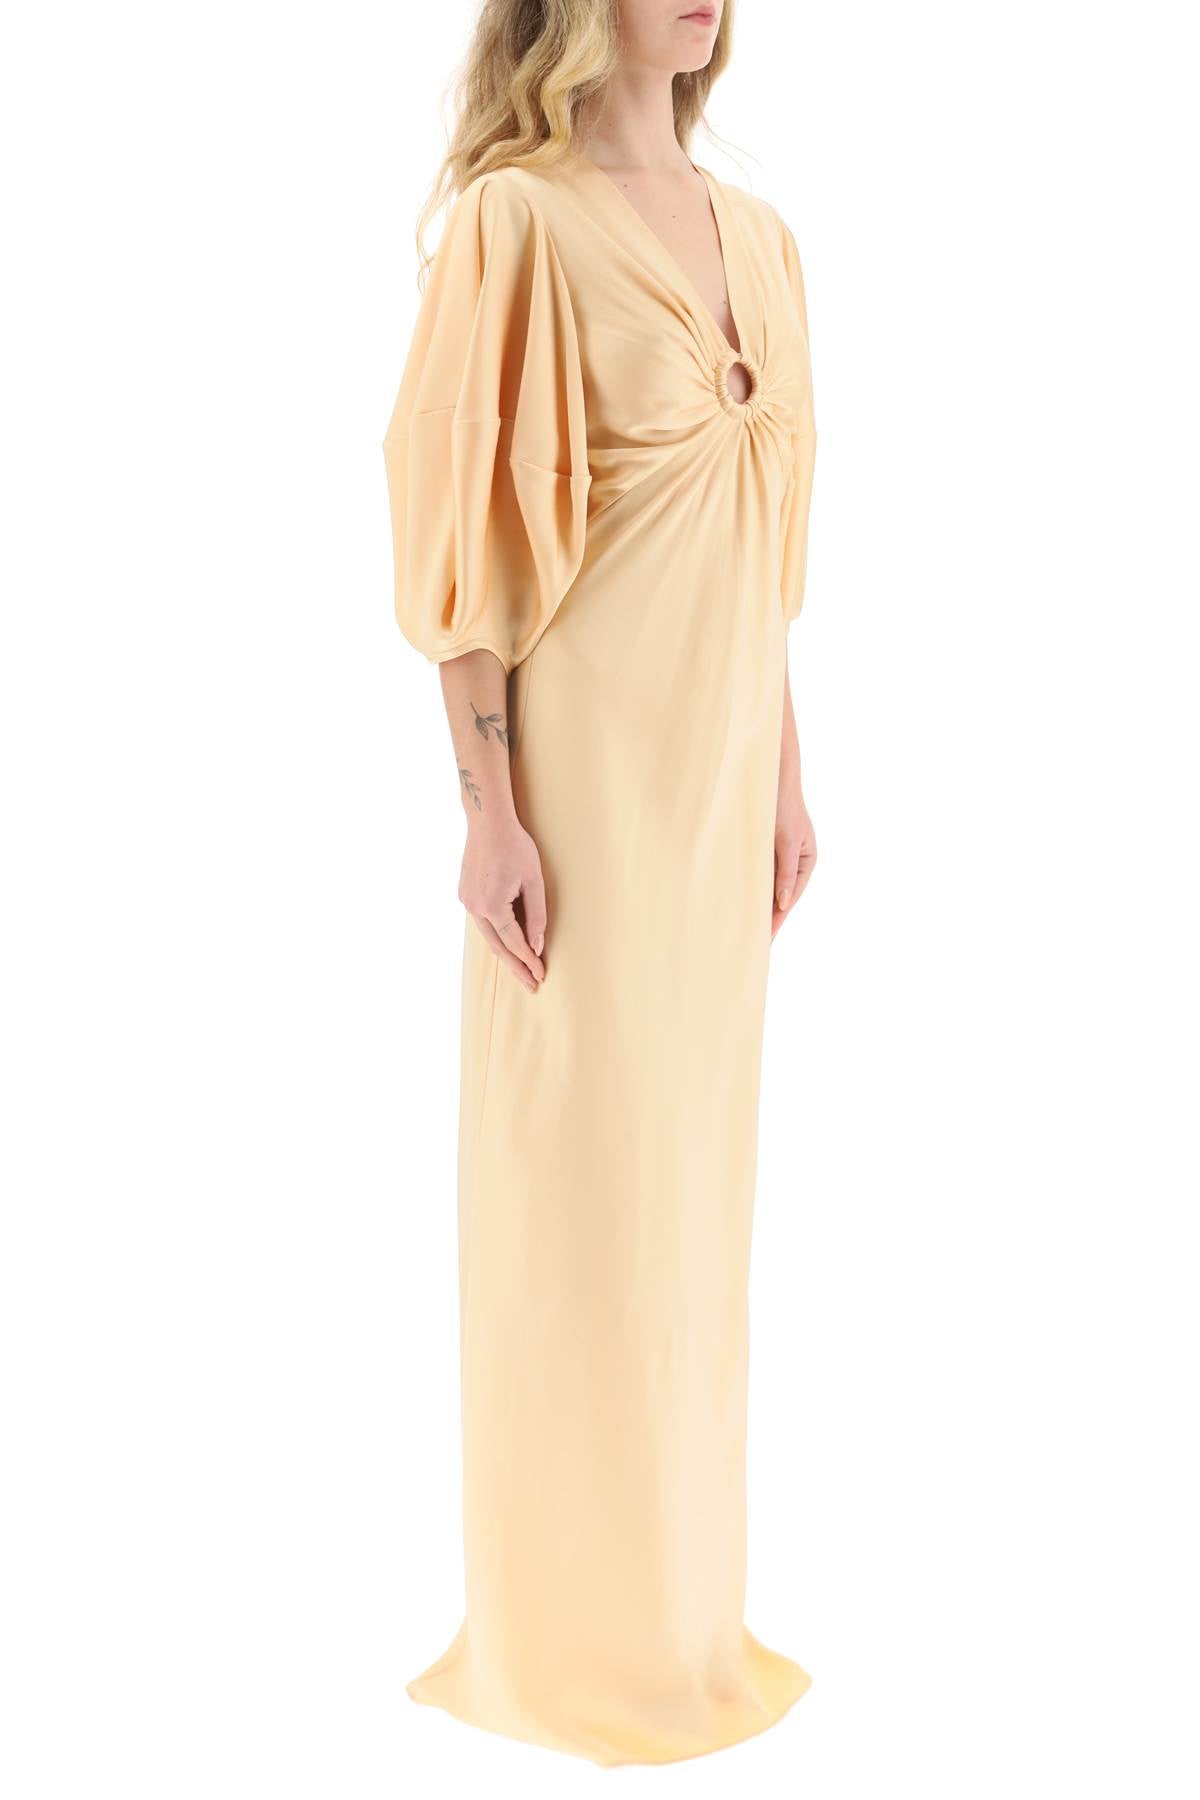 Stella mccartney satin maxi dress with cut-out ring detail-1